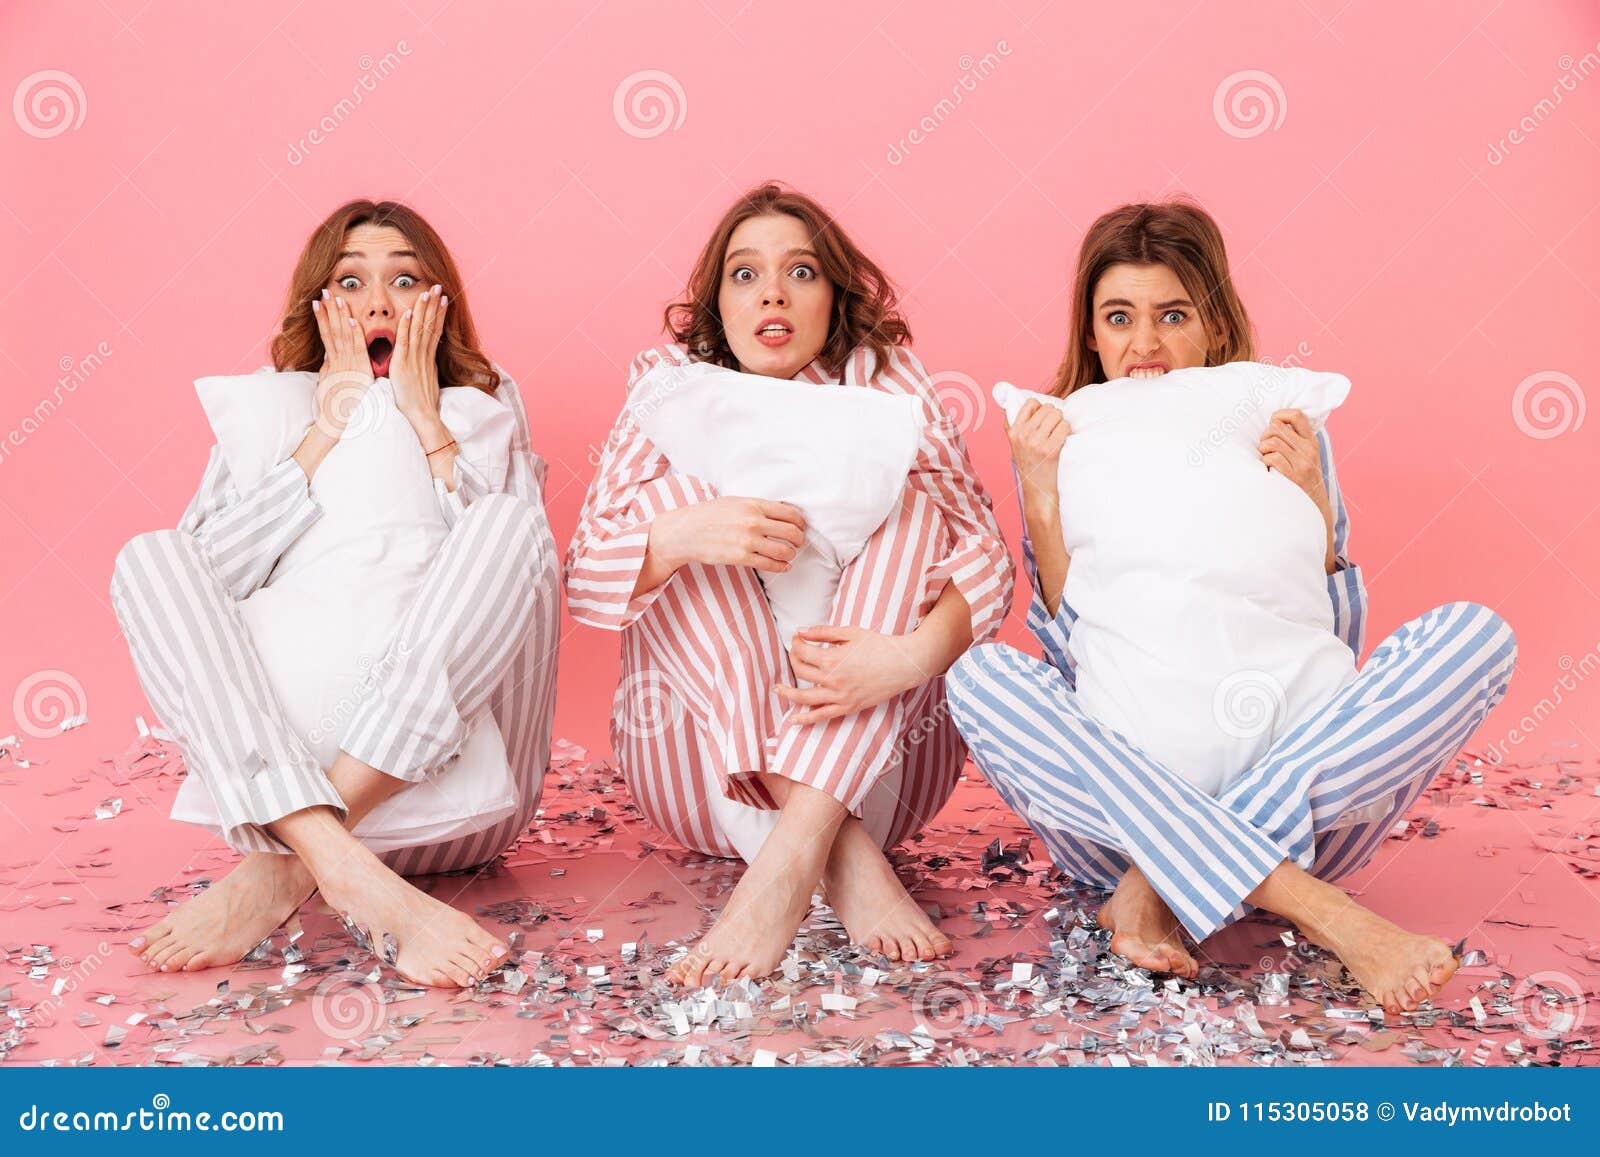 Scared Women Friends Wearing Leisure Clothing Holding Pillows. Stock ...